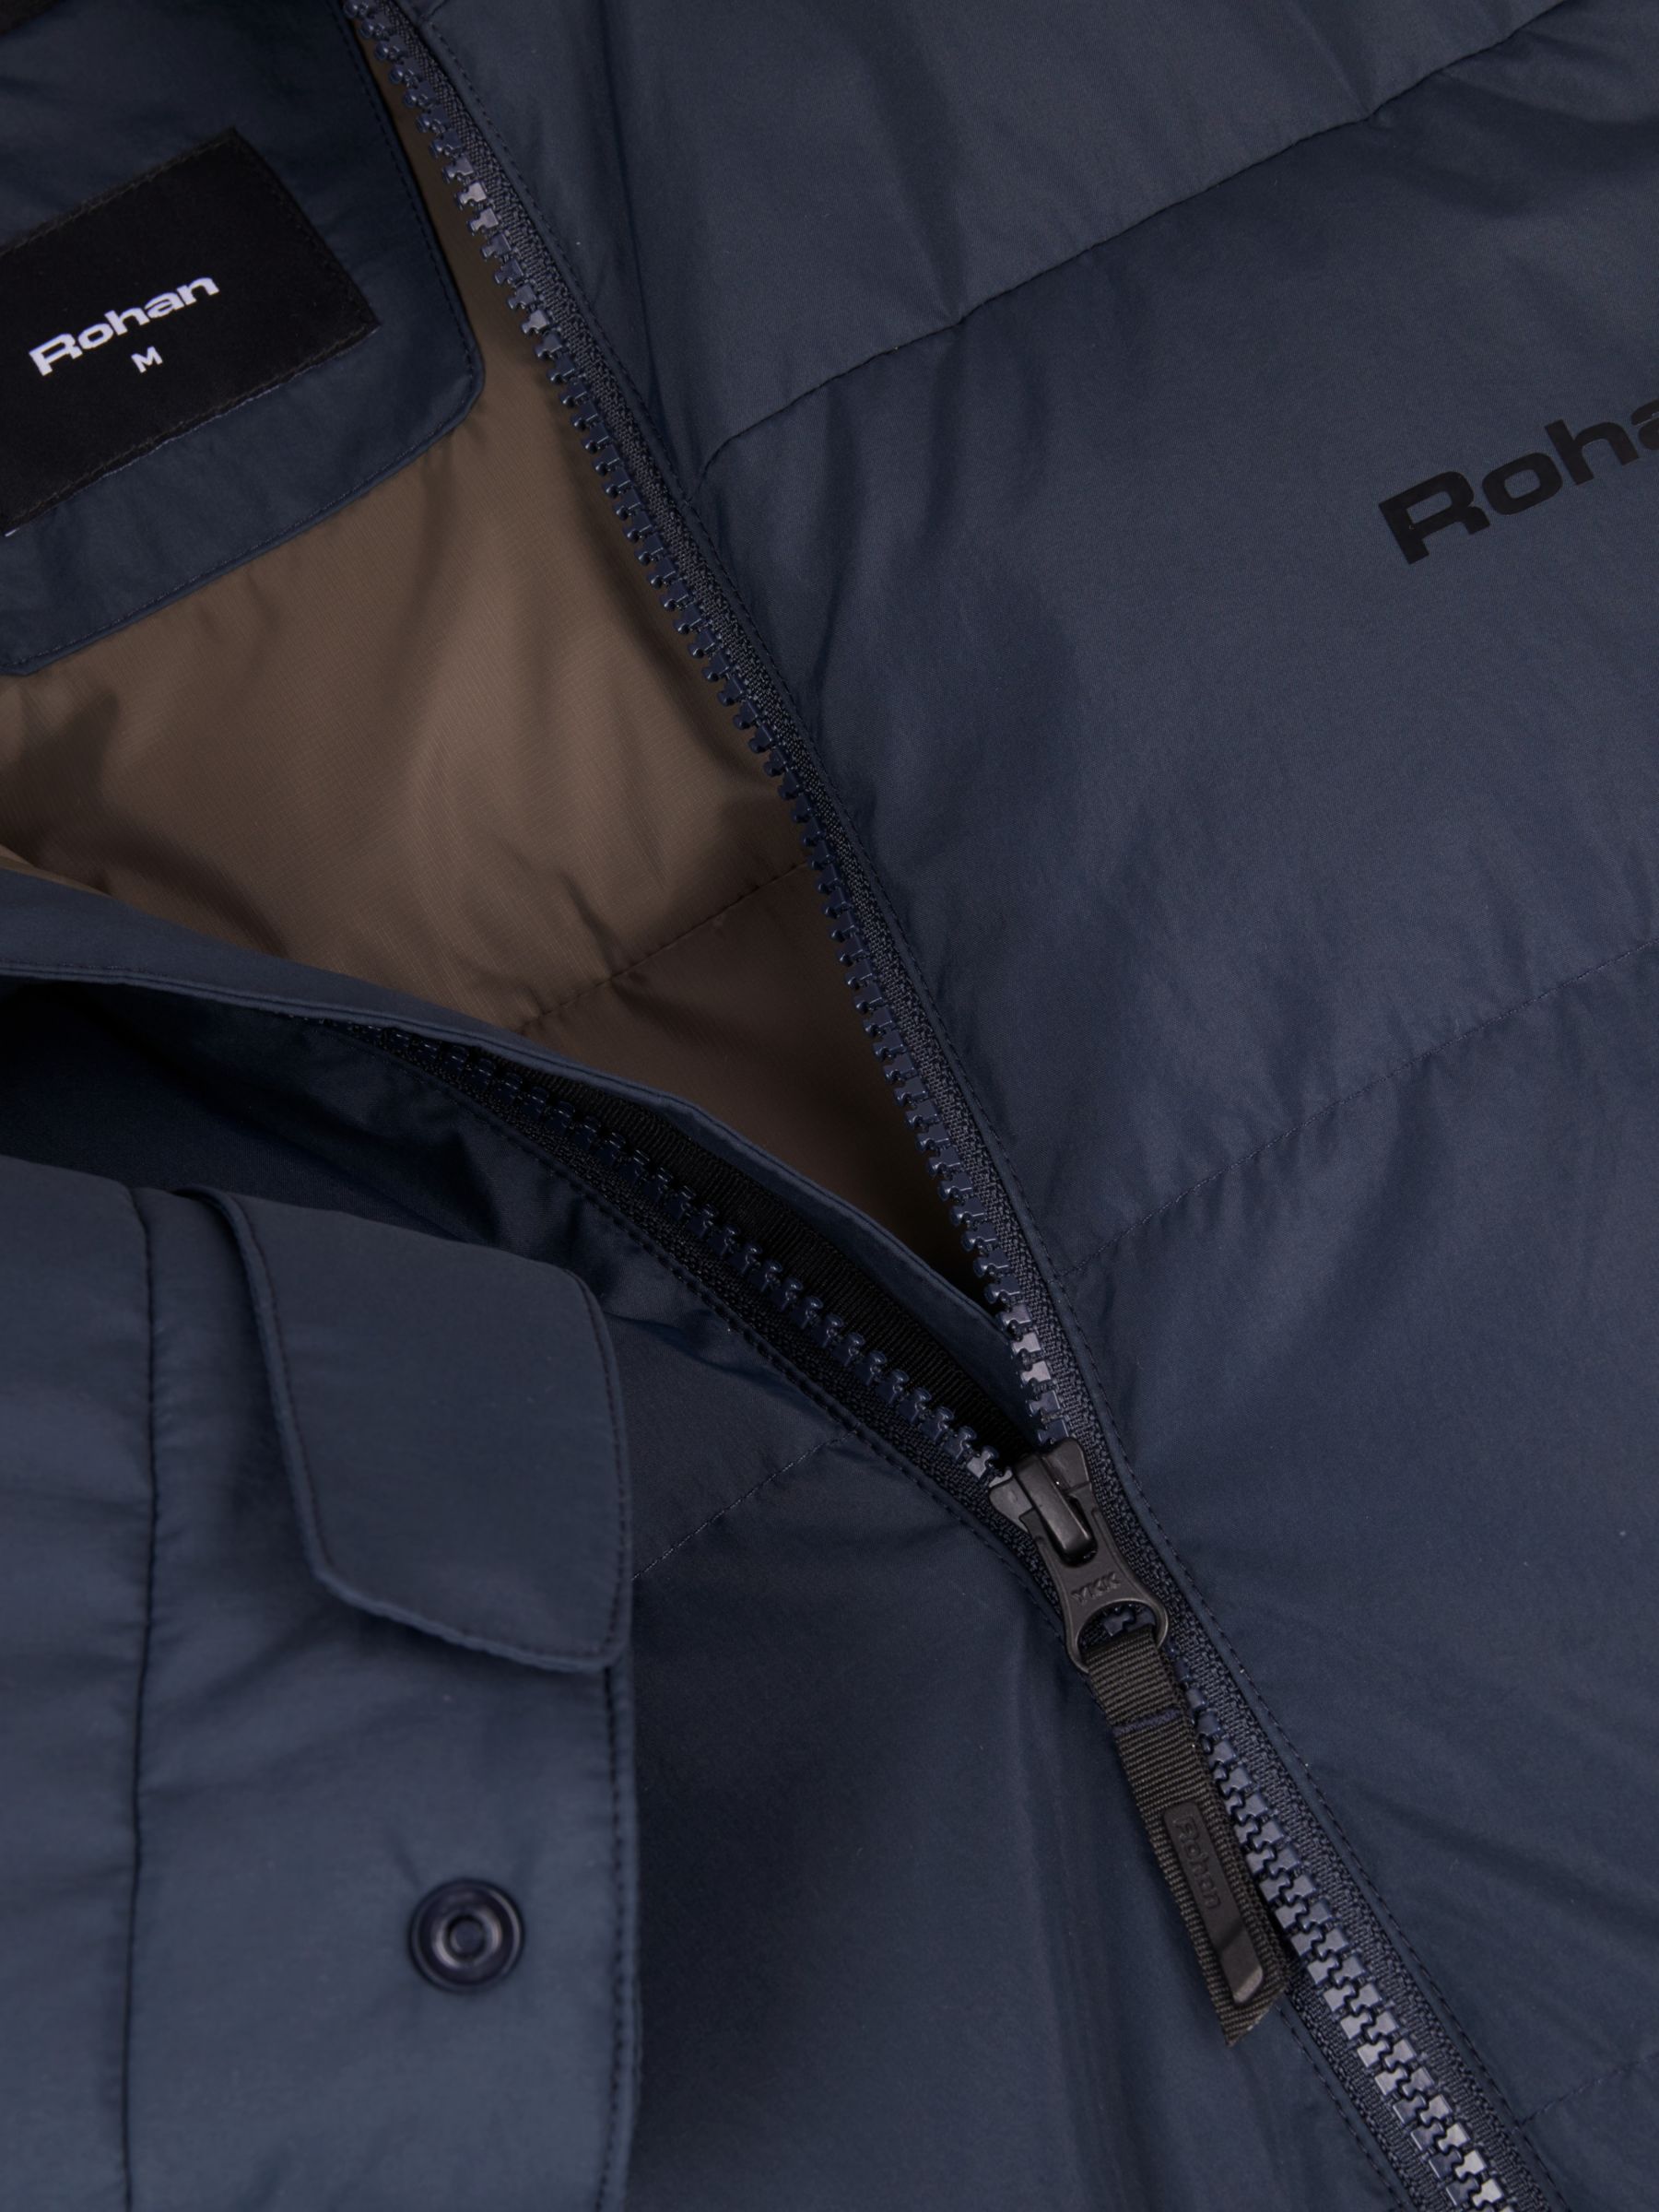 Rohan Delta Men's Insulated Jacket at John Lewis & Partners